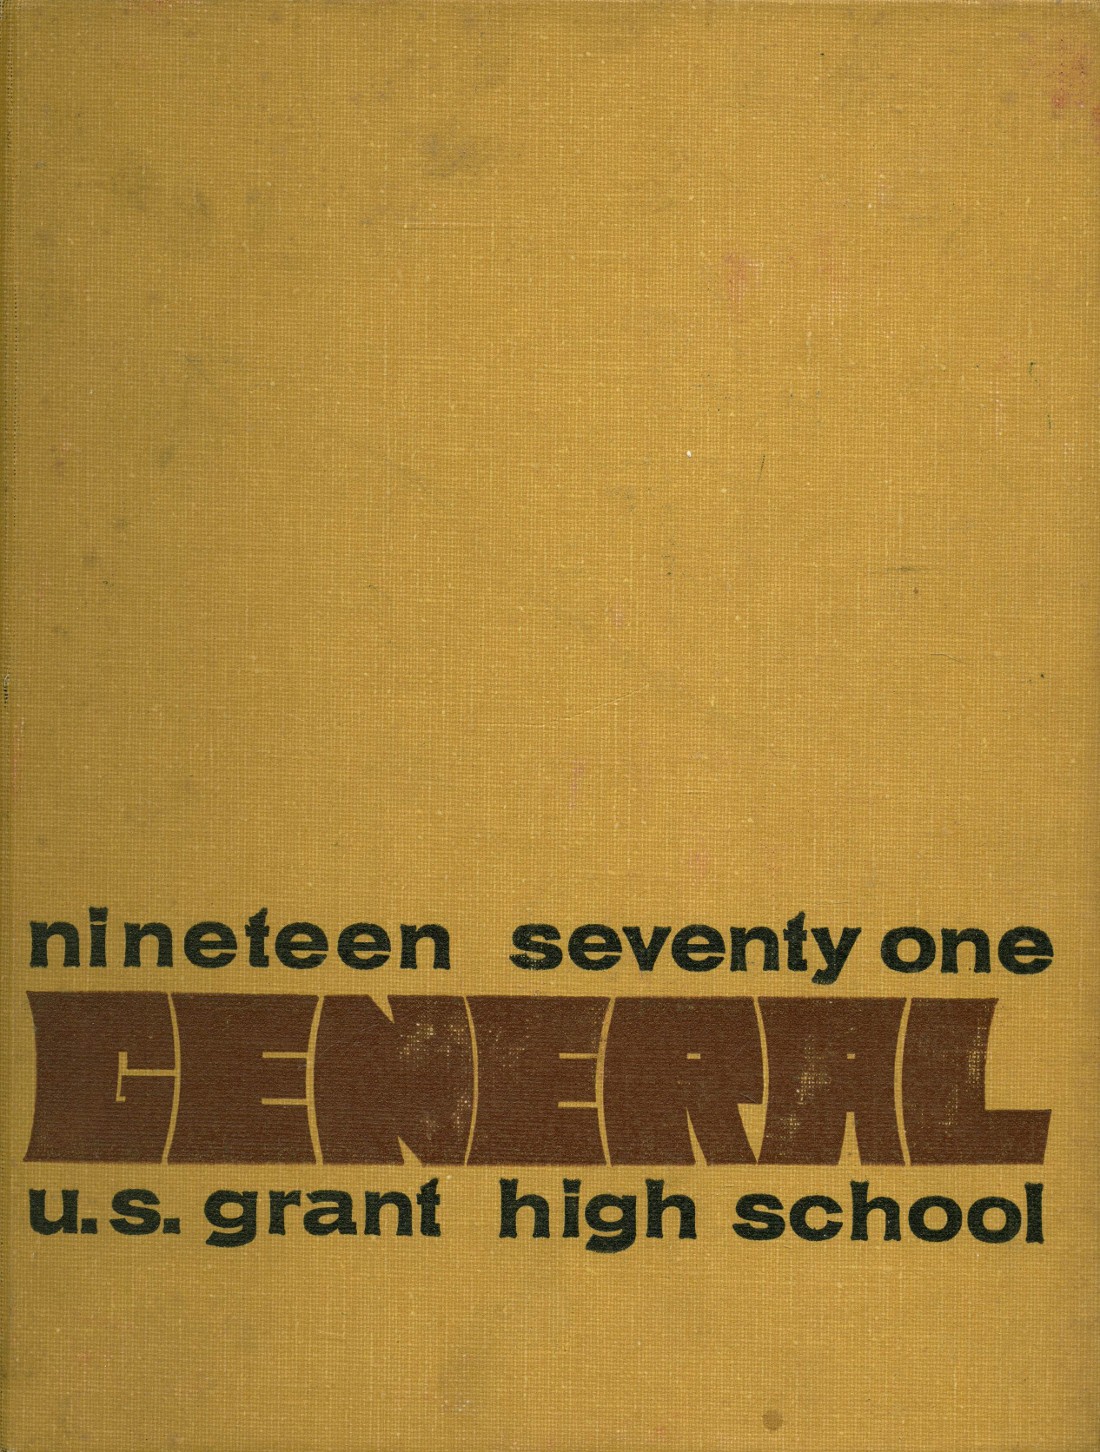 1971 yearbook from U.S. Grant High School from Oklahoma city, Oklahoma ...